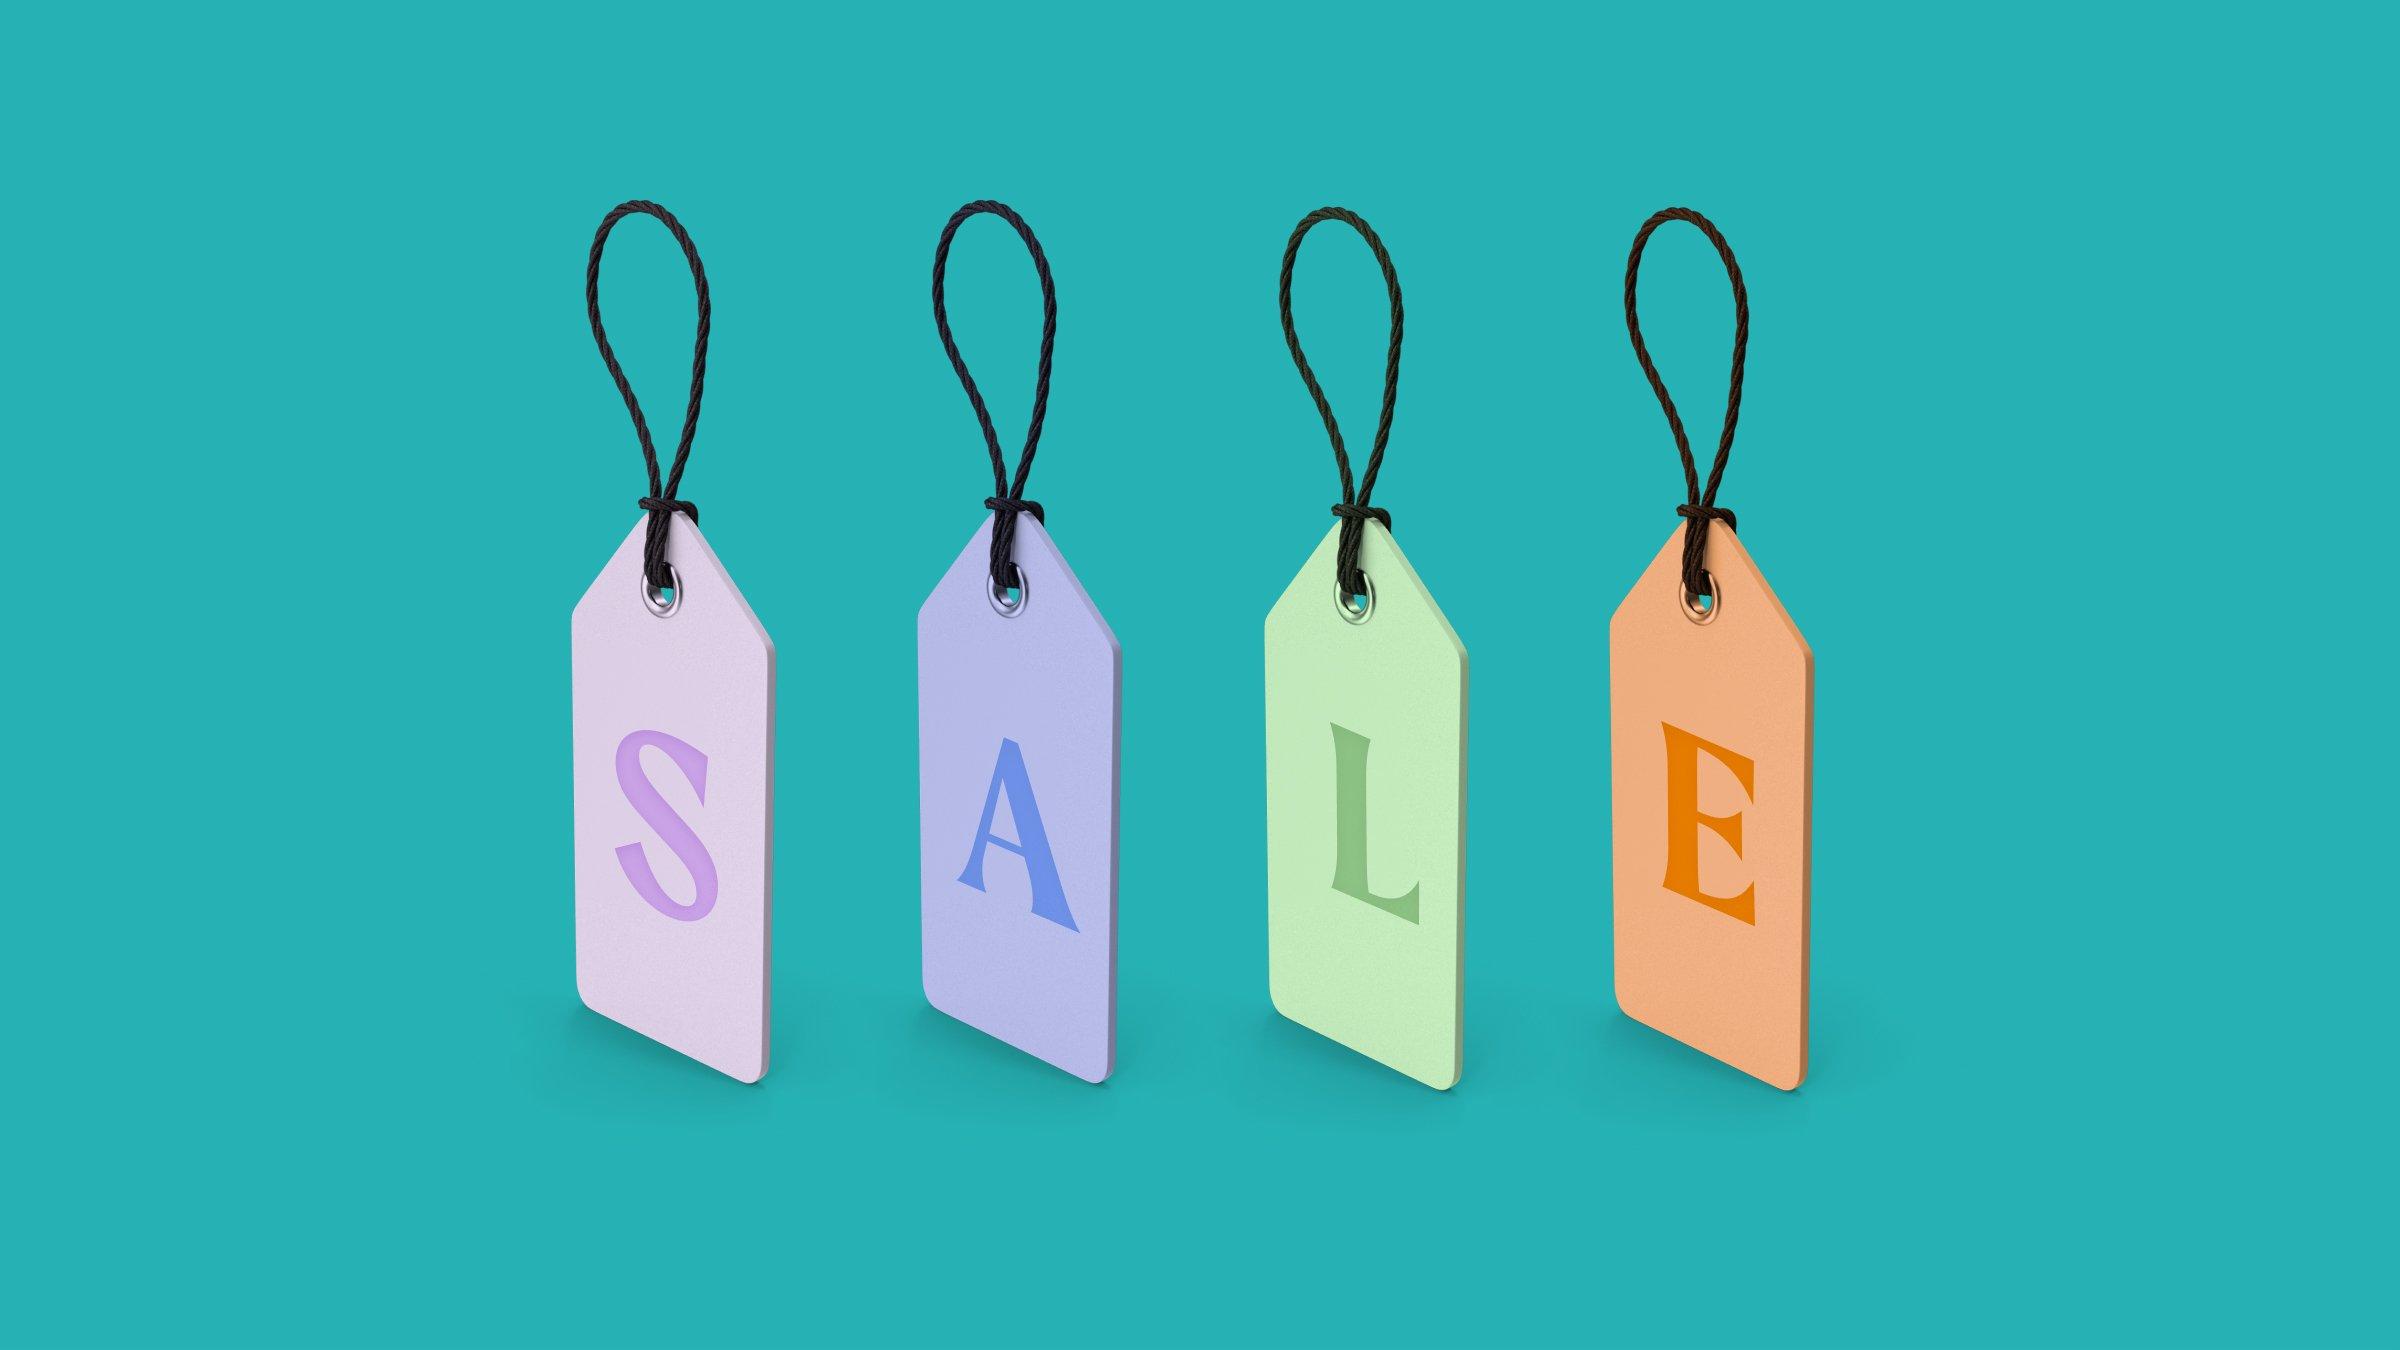 8 Marketing Ideas to Promote Your Cyber Monday Deals & Boost Sales